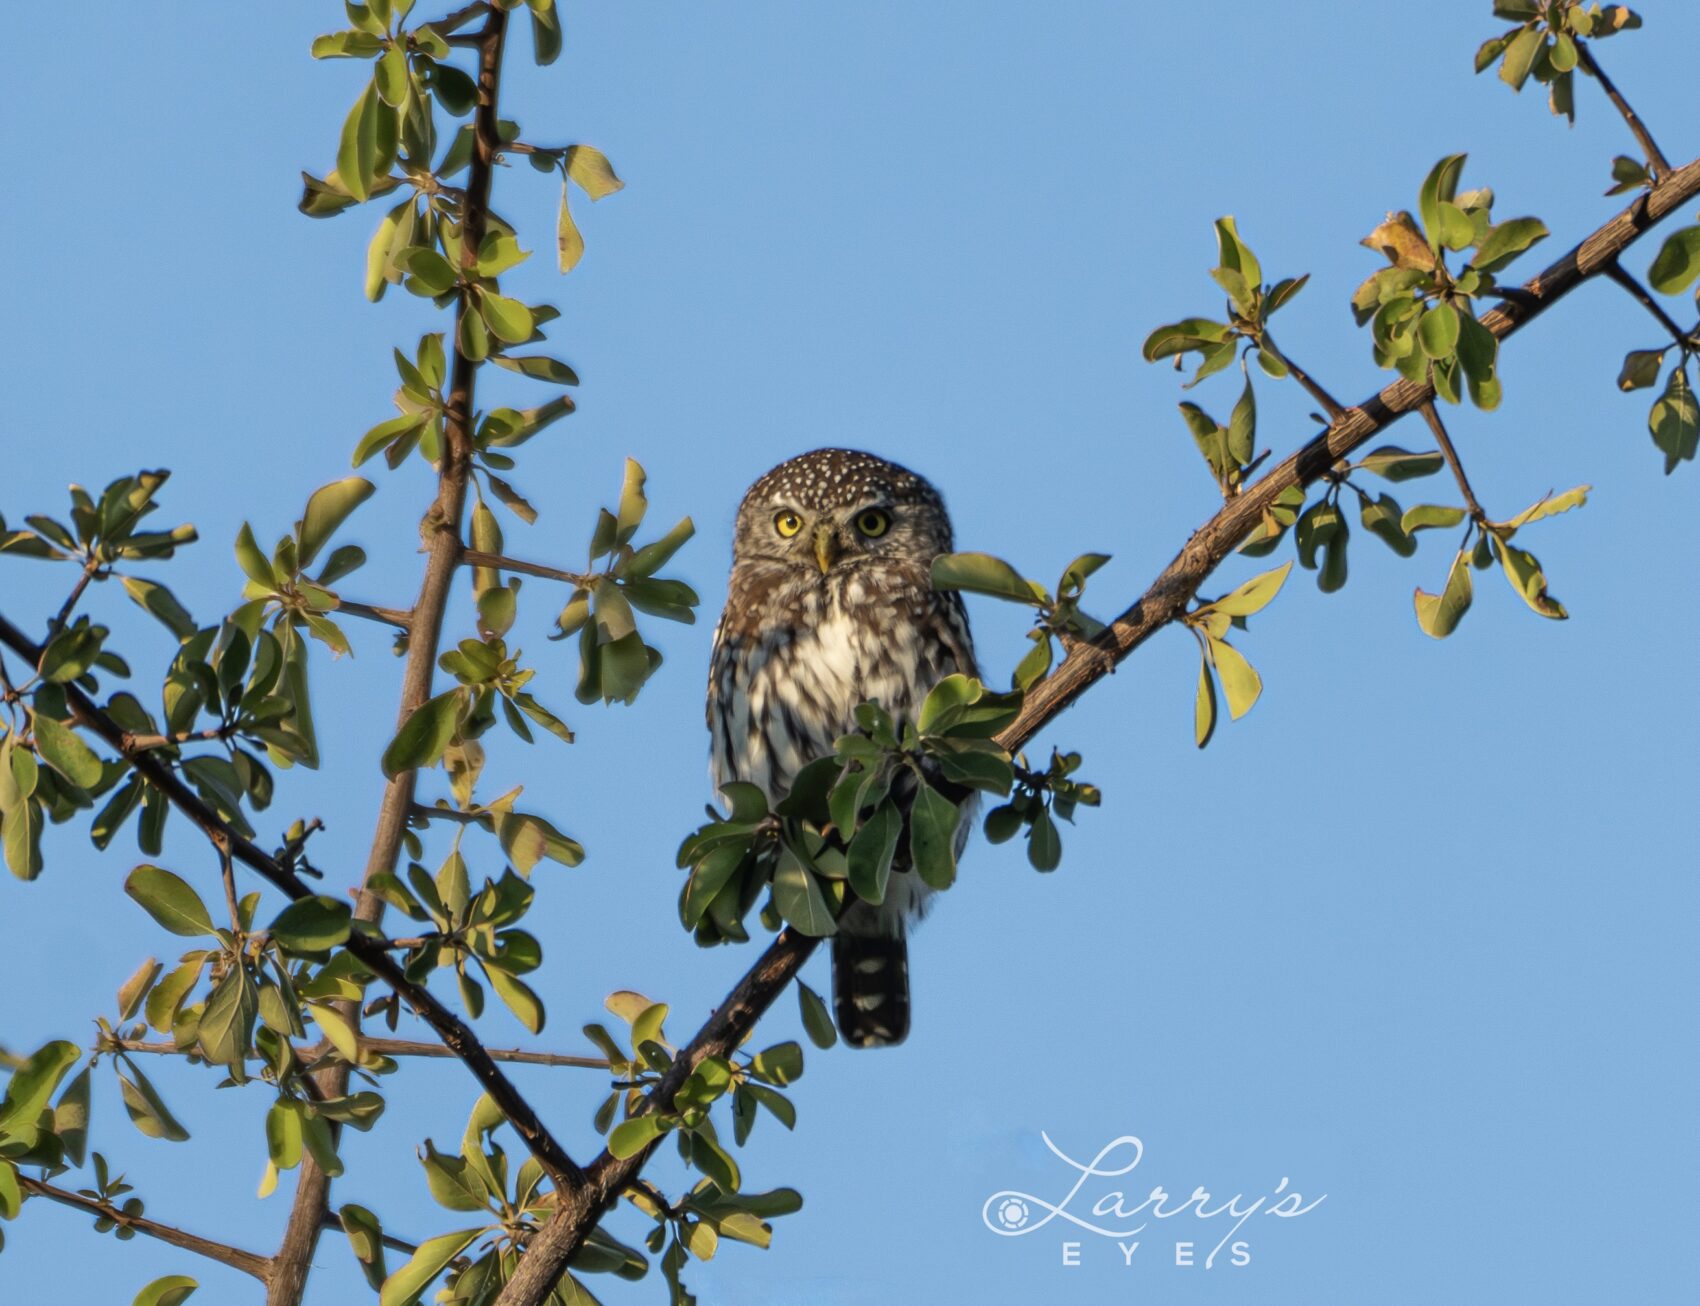 Pearl Spotted owl in Botswana 